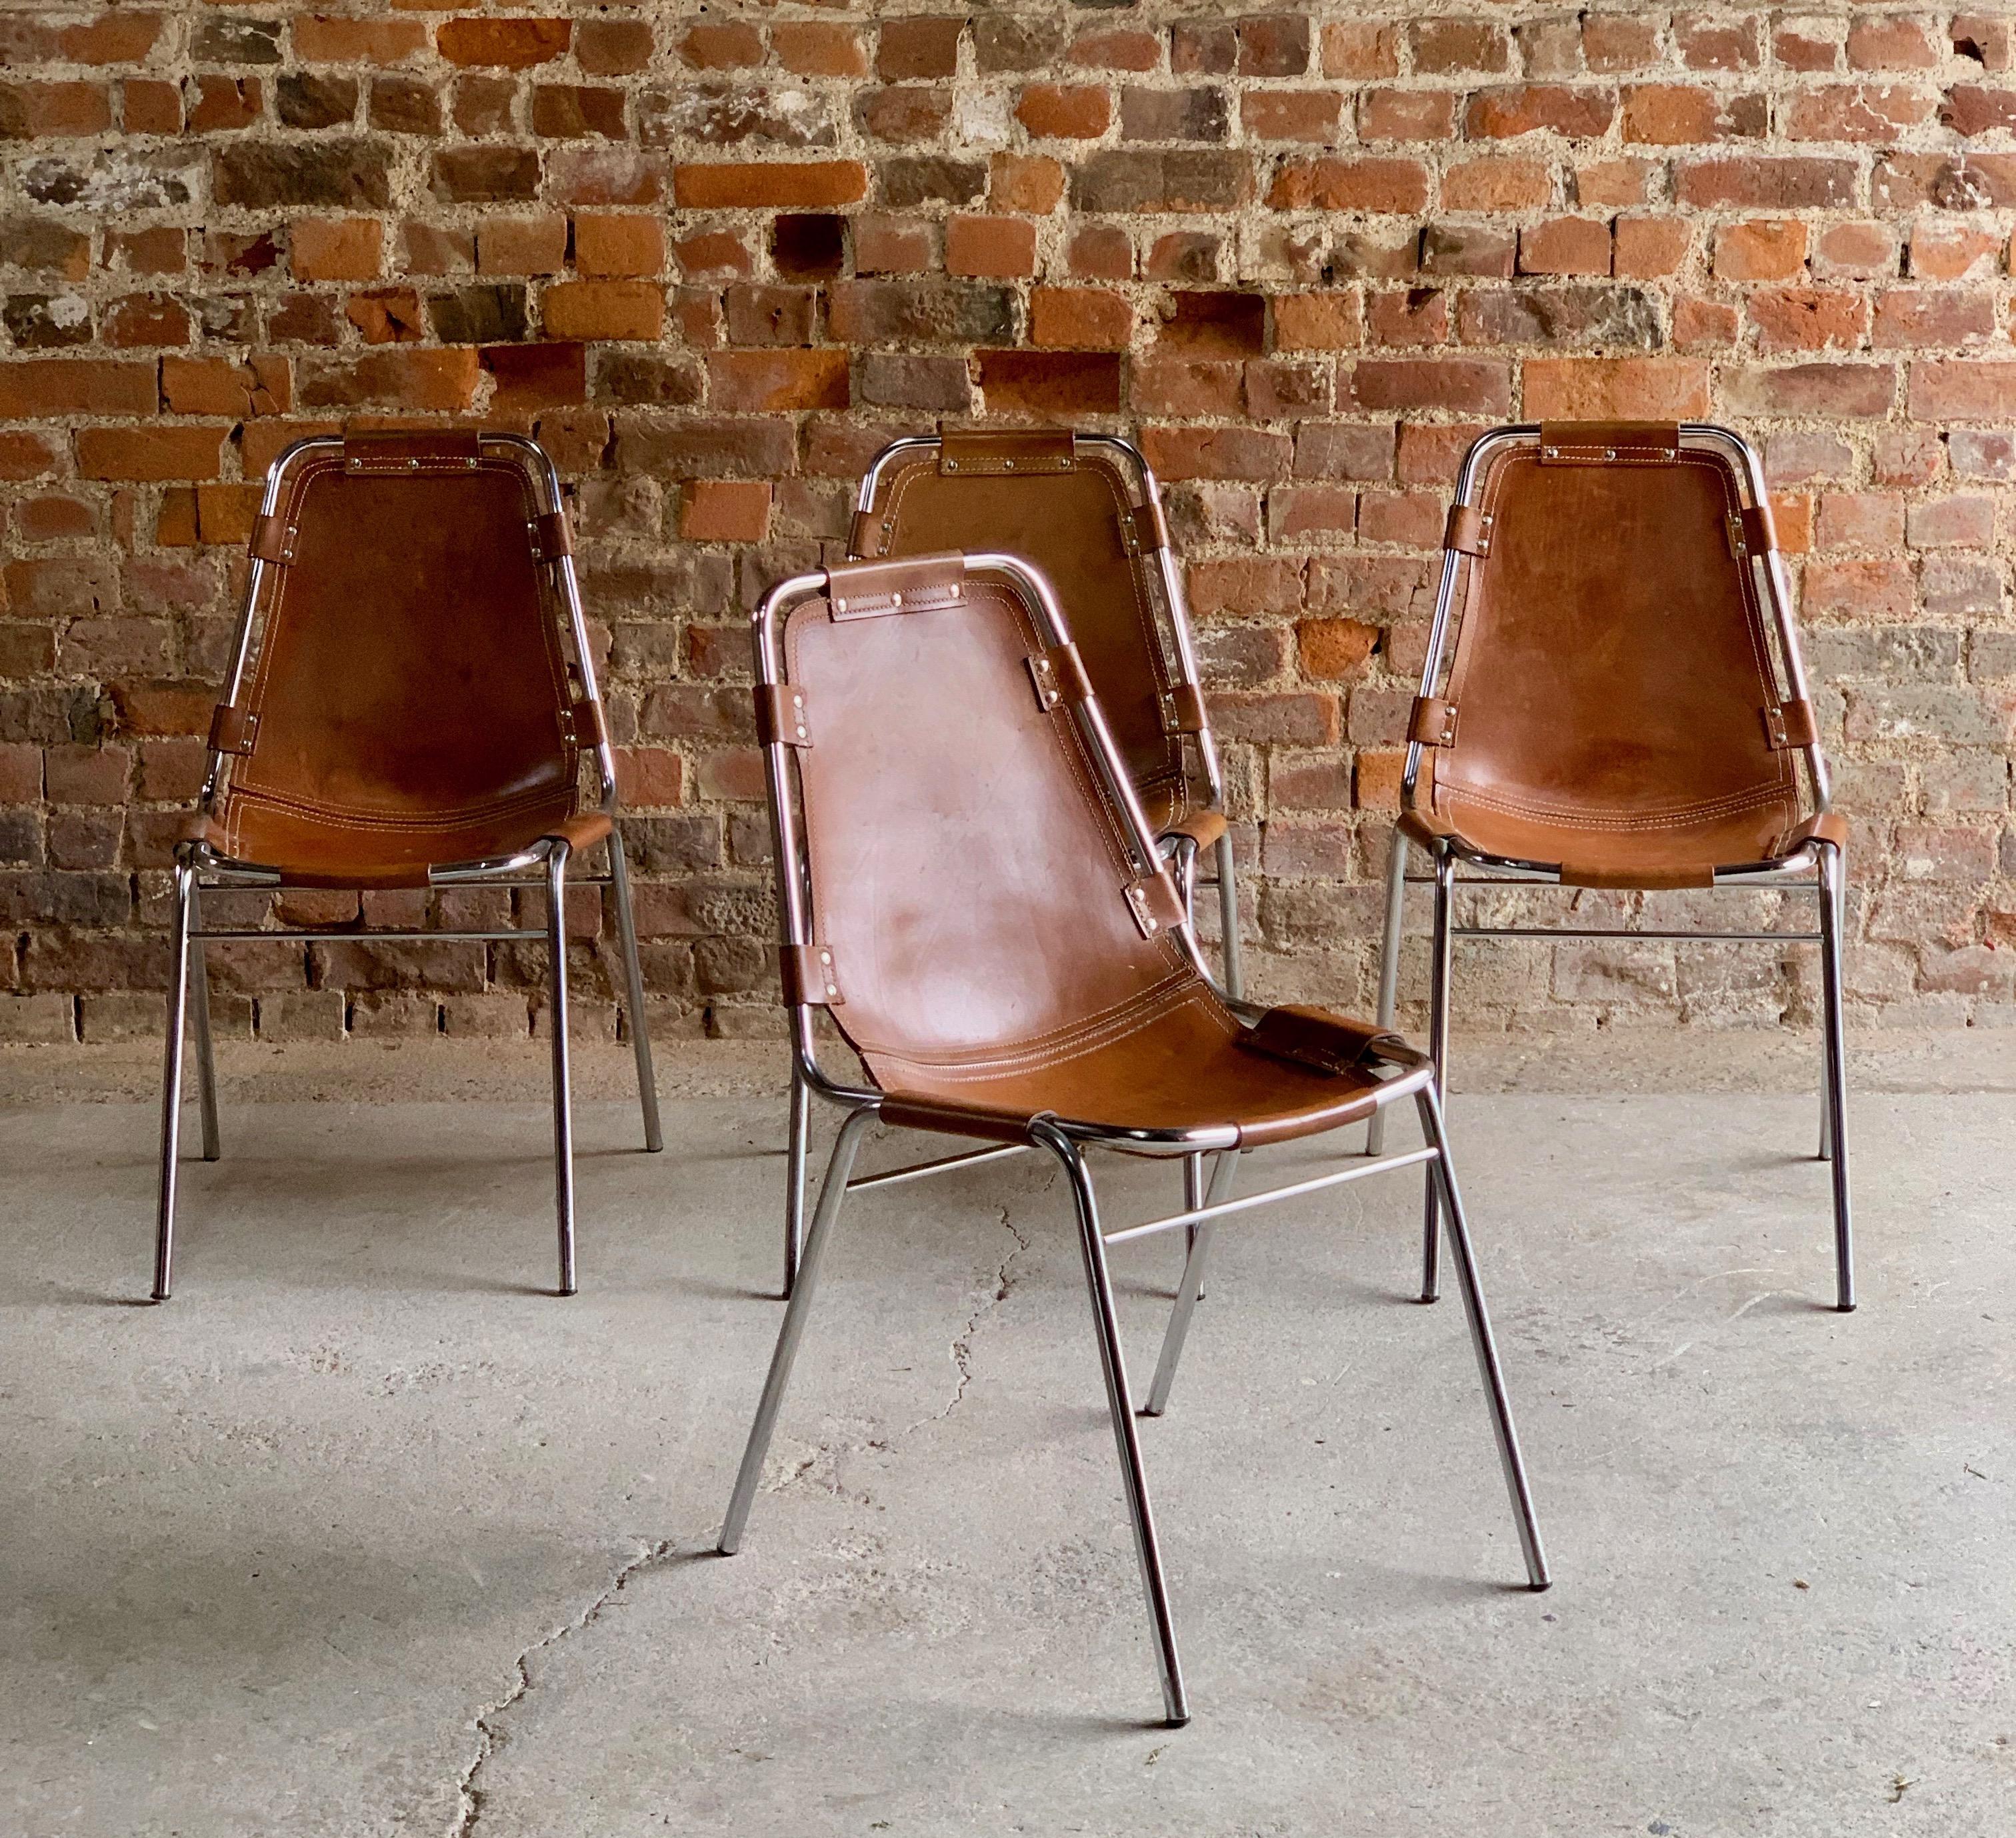 Dining chairs leather four Les Arcs 1970s original.

Fabulous set of four tan leather 'Les Arcs' dining chairs manufactured by the Italian firm, Dal Vera, and selected by Charlotte Perriand for the Les Arcs ski resort, each chair consists of a